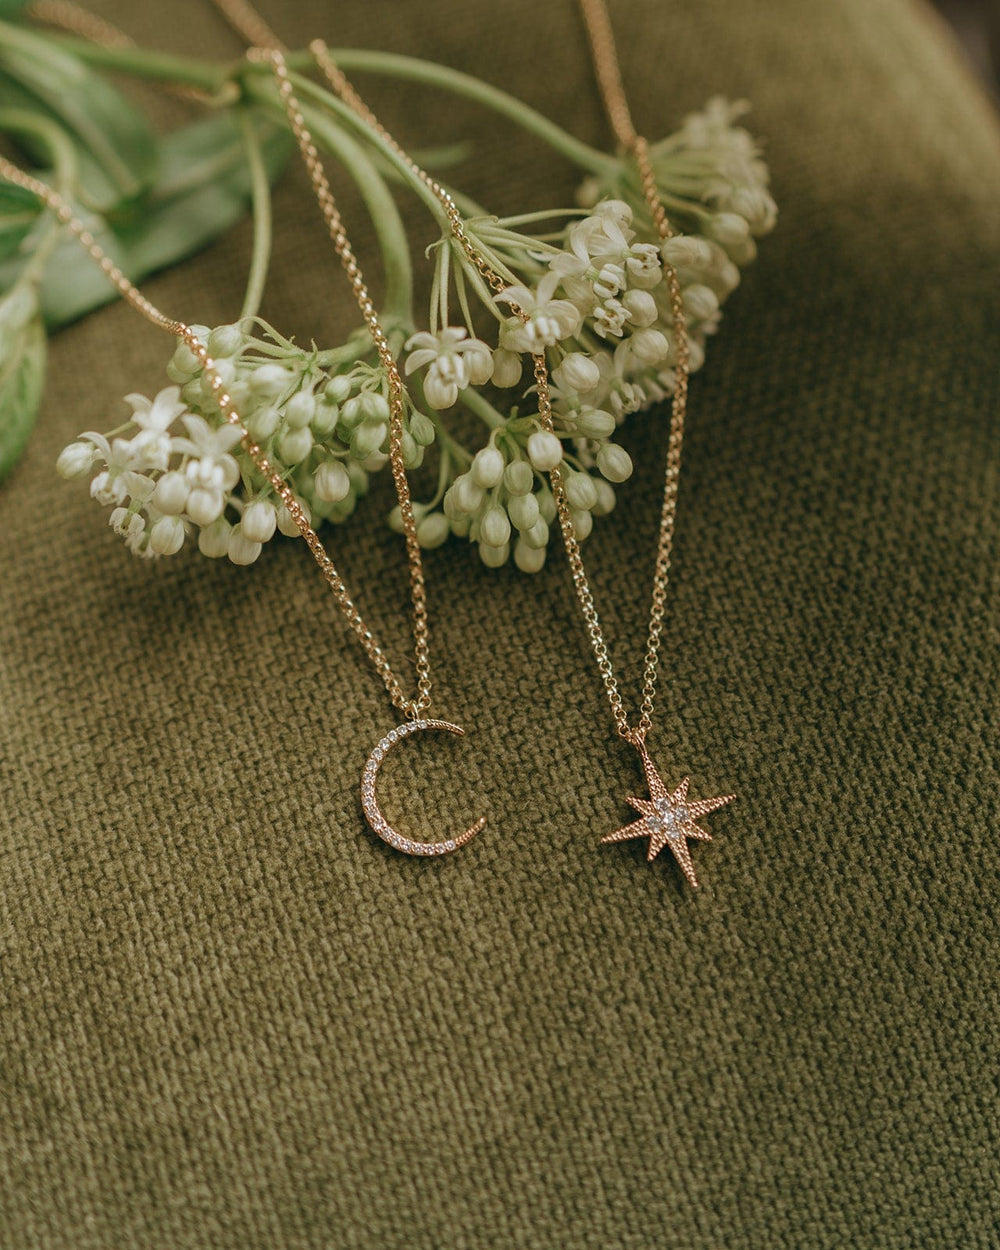 Sutton Stone Star and Crescent Moon Necklaces